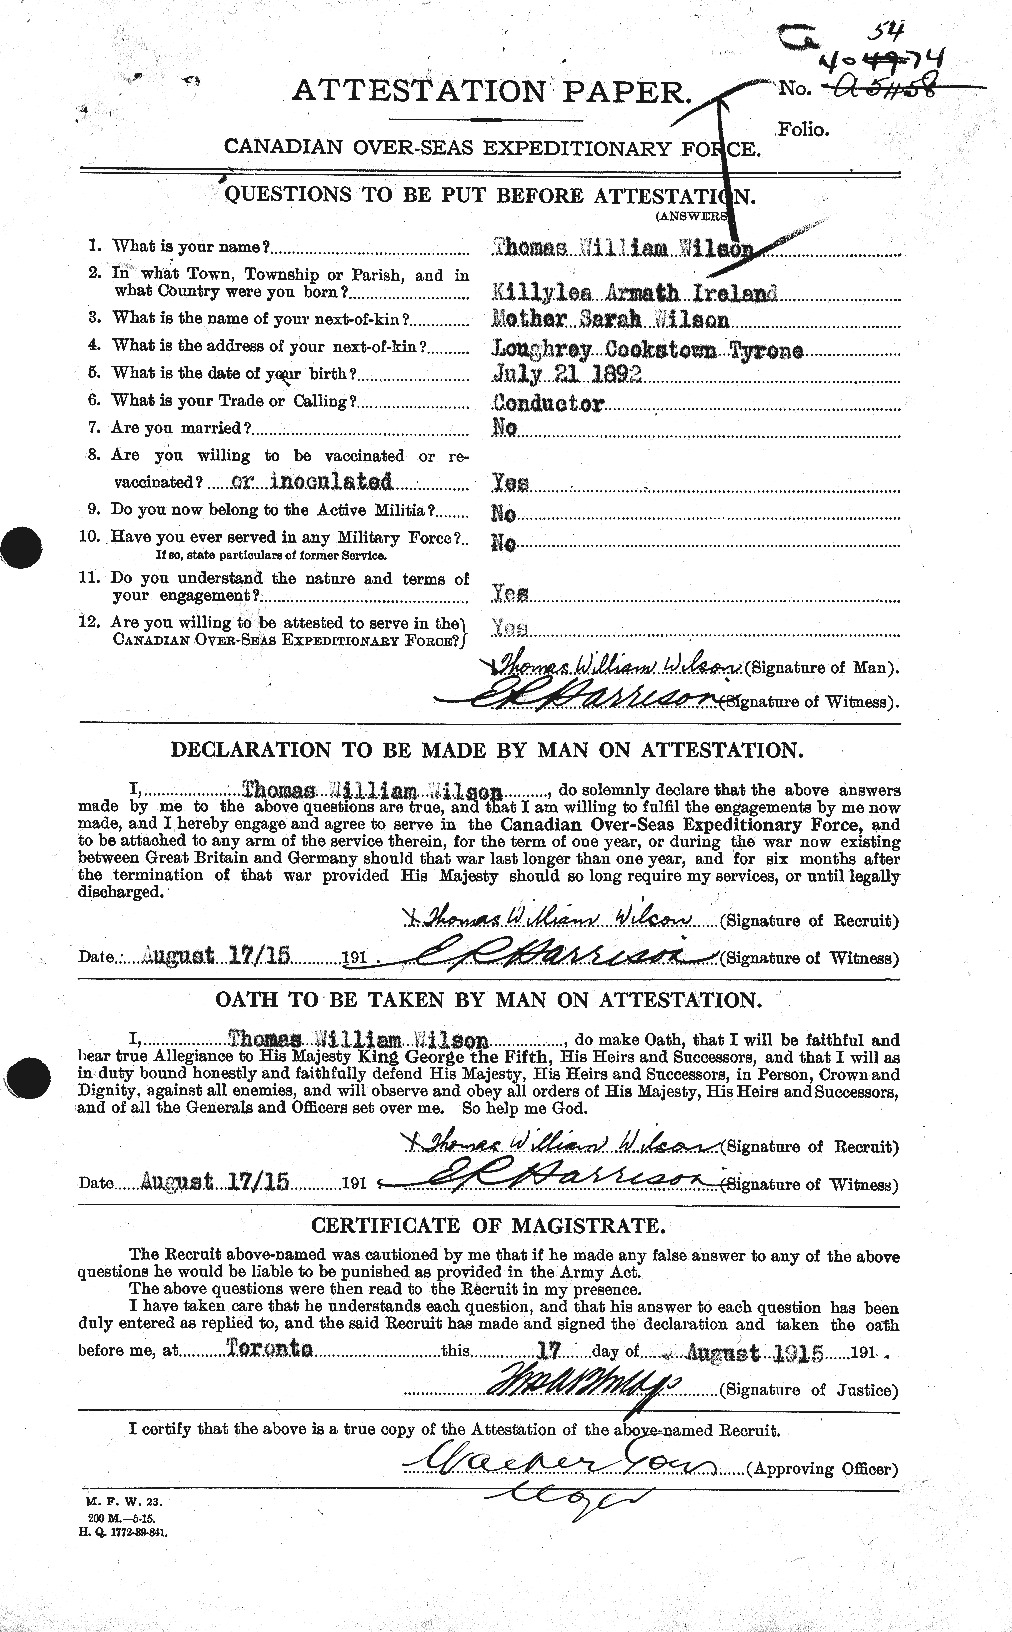 Personnel Records of the First World War - CEF 681696a